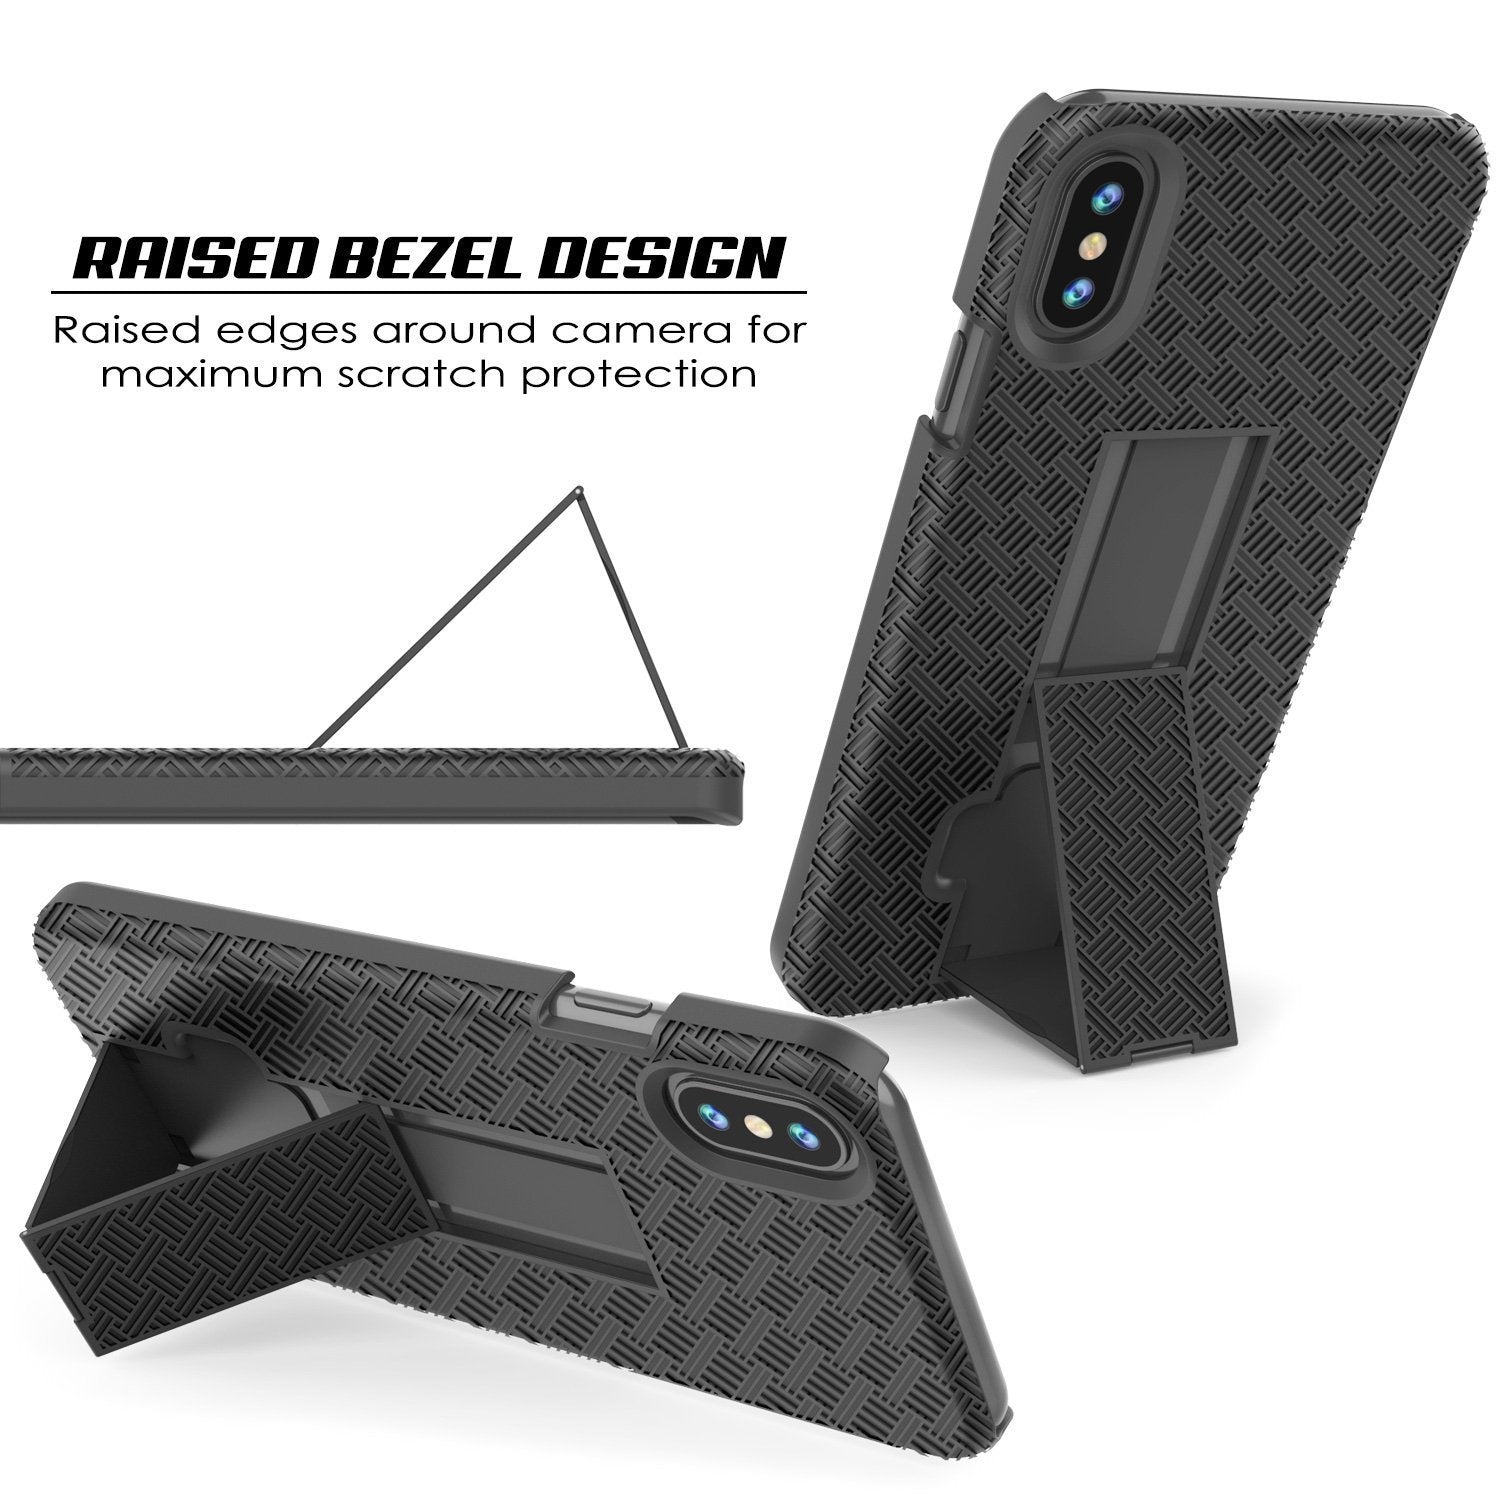 iPhone X Case, Holster Belt Clip & Built-In Kickstand Cover [Black]